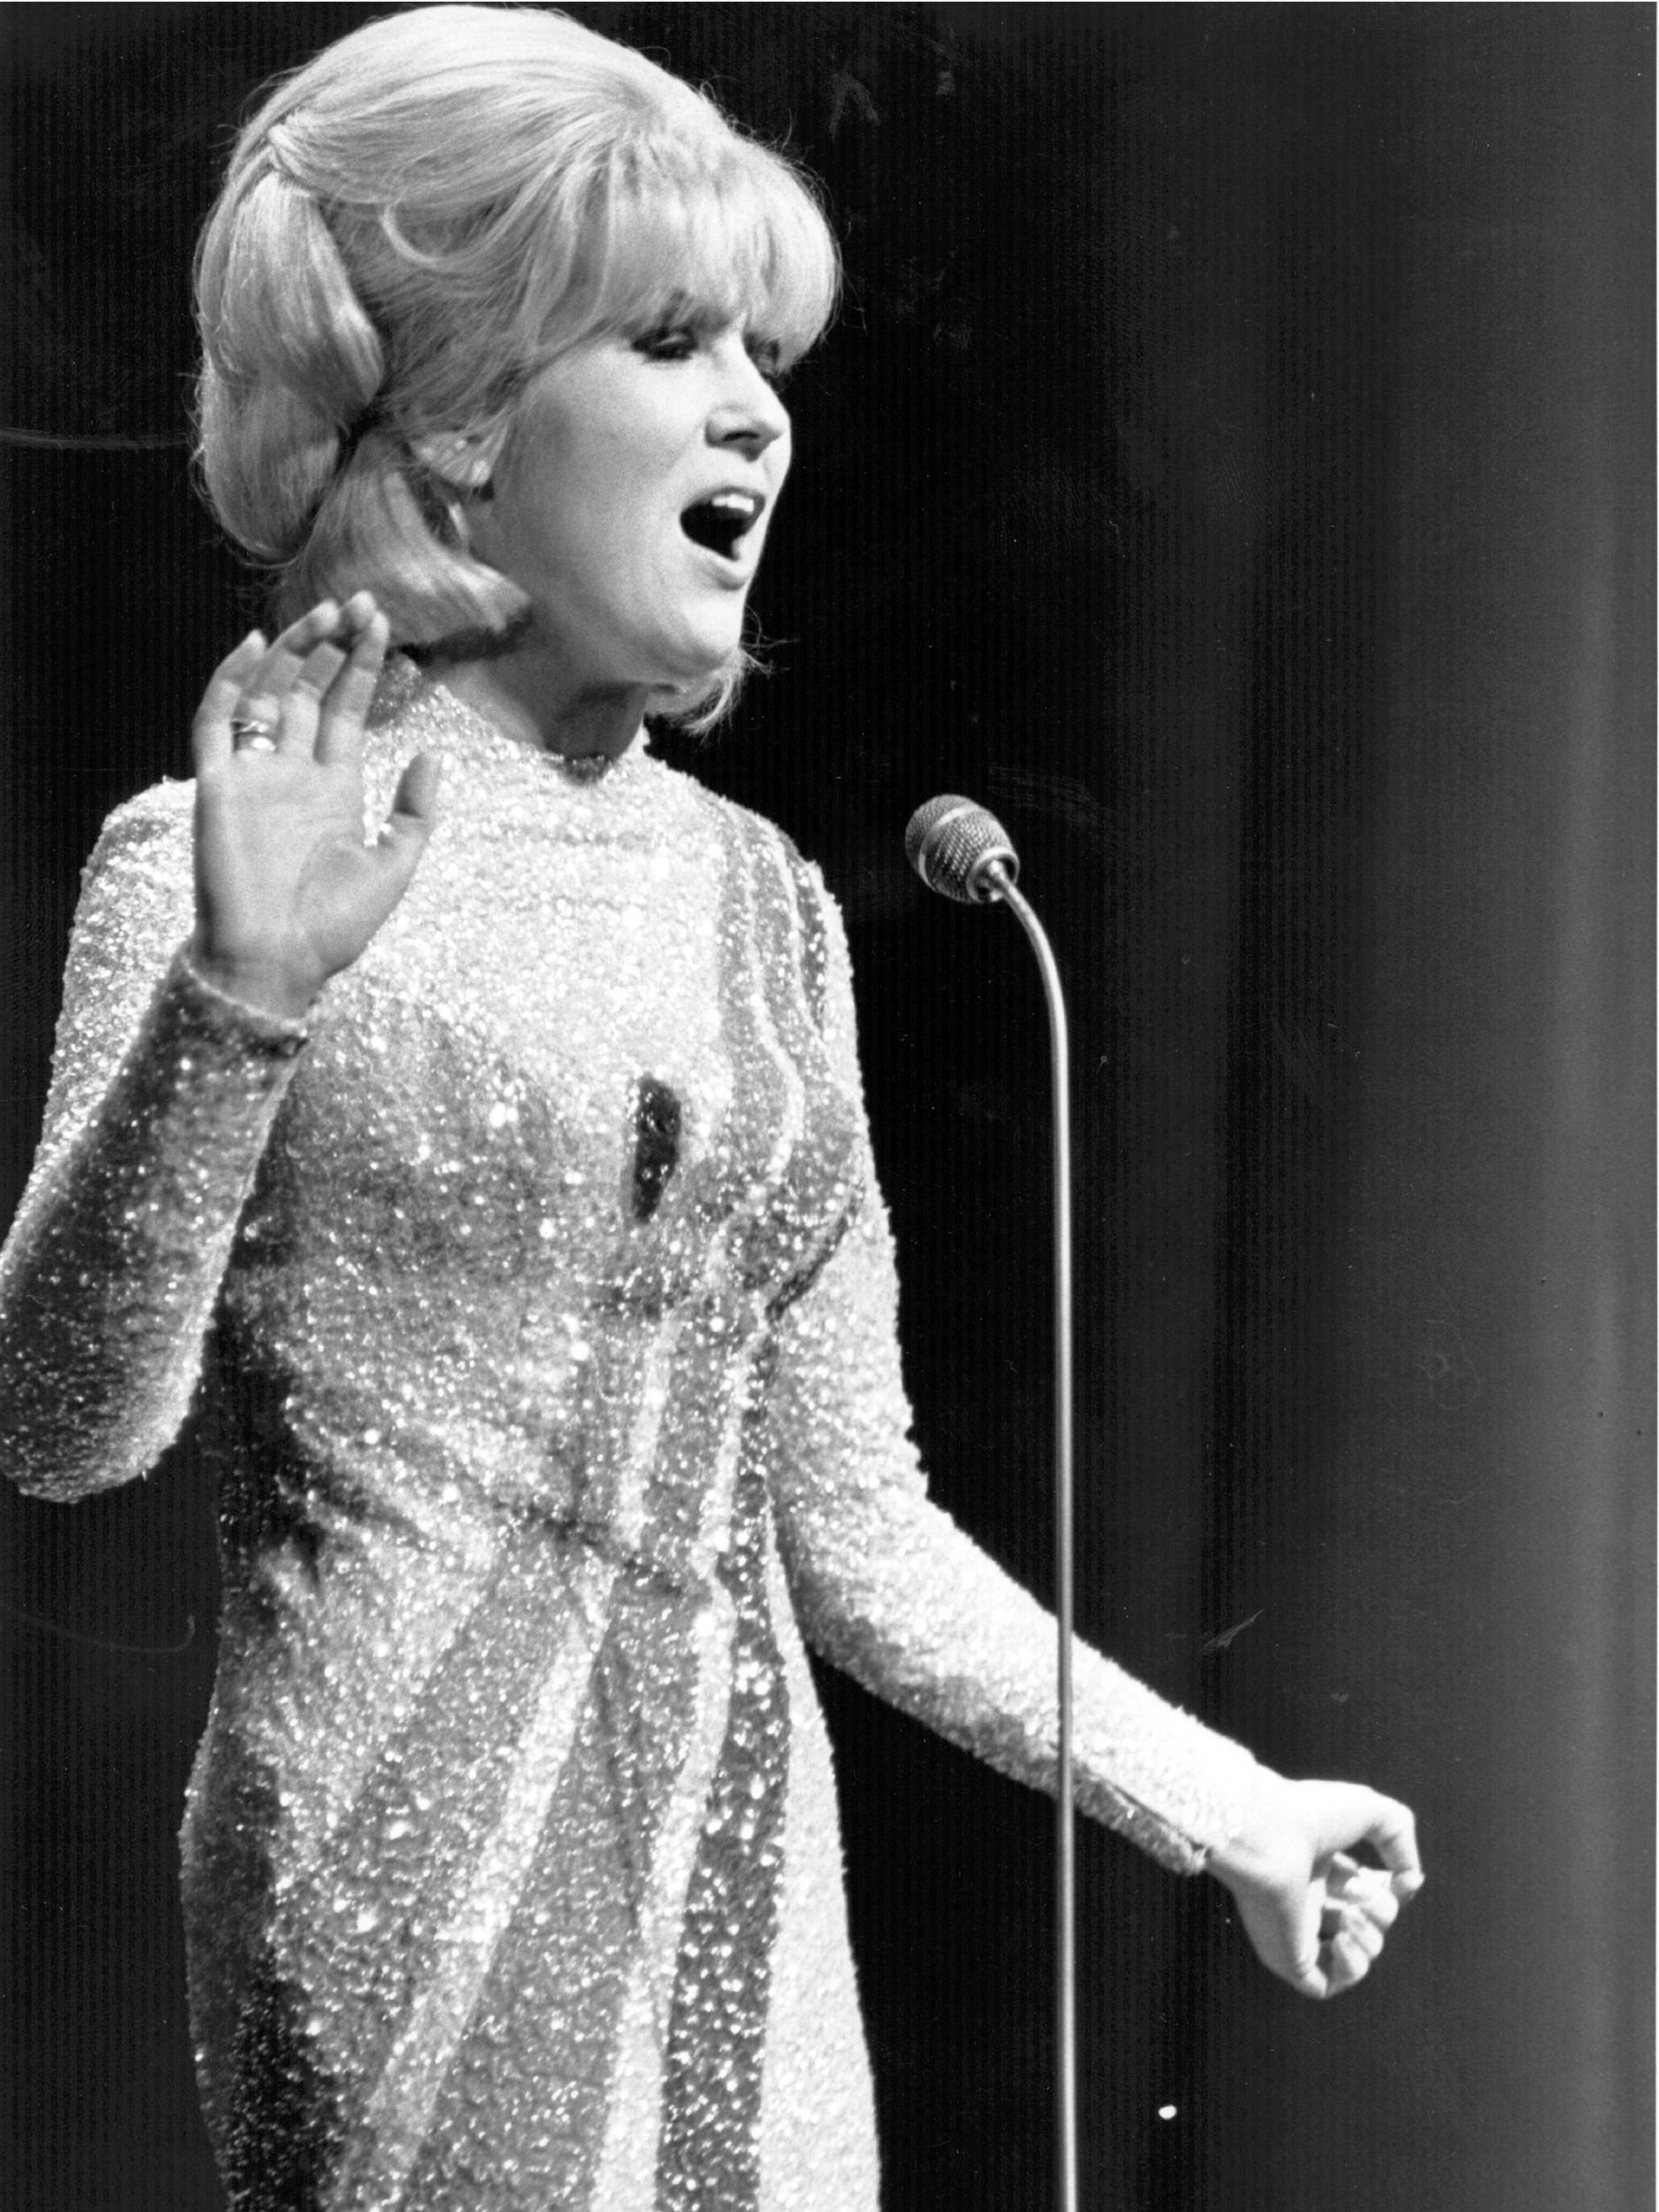 Performing in the Royal Variety Show at the London Palladium in 1965